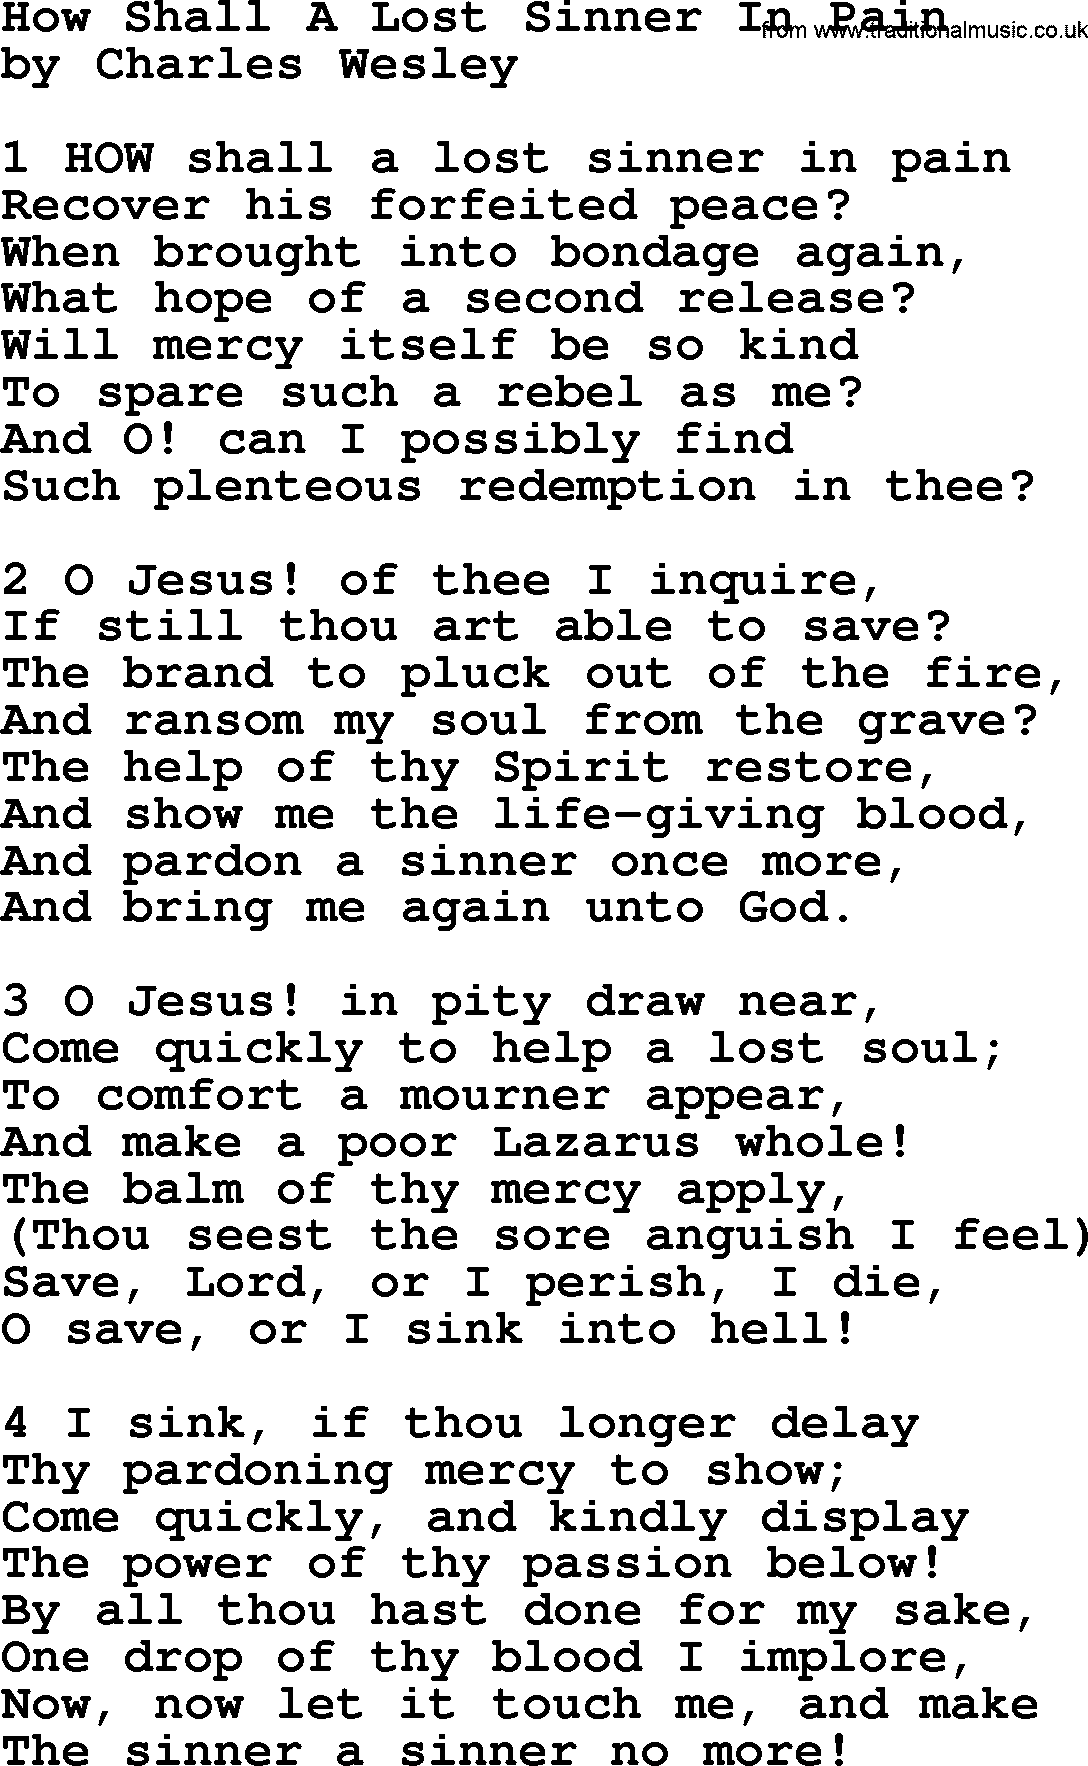 Charles Wesley hymn: How Shall A Lost Sinner In Pain, lyrics